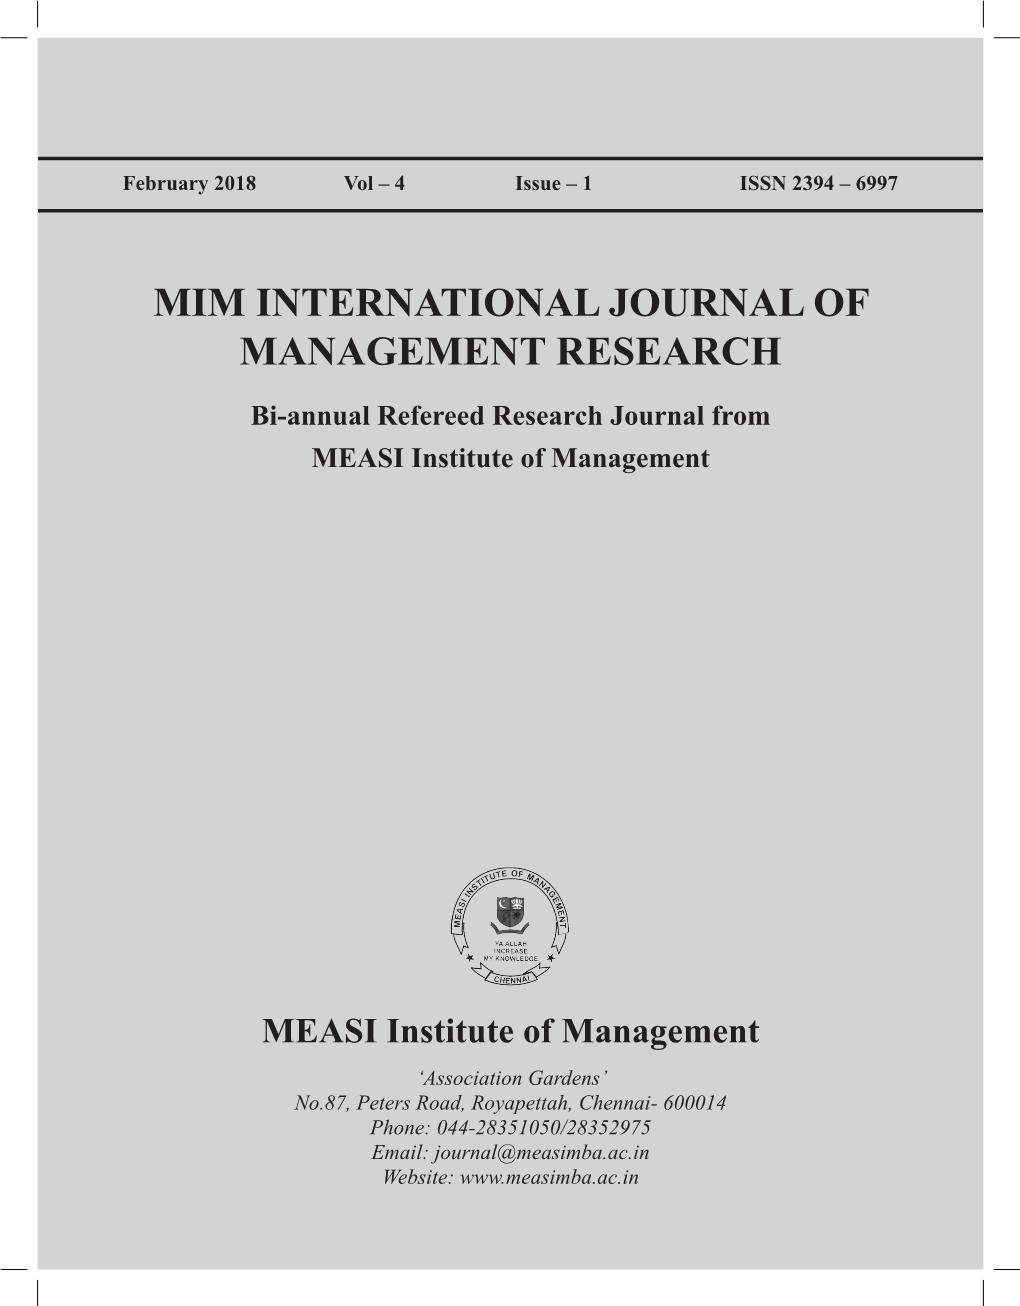 MIM INTERNATIONAL JOURNAL of MANAGEMENT RESEARCH Bi-Annual Refereed Research Journal from MEASI Institute of Management